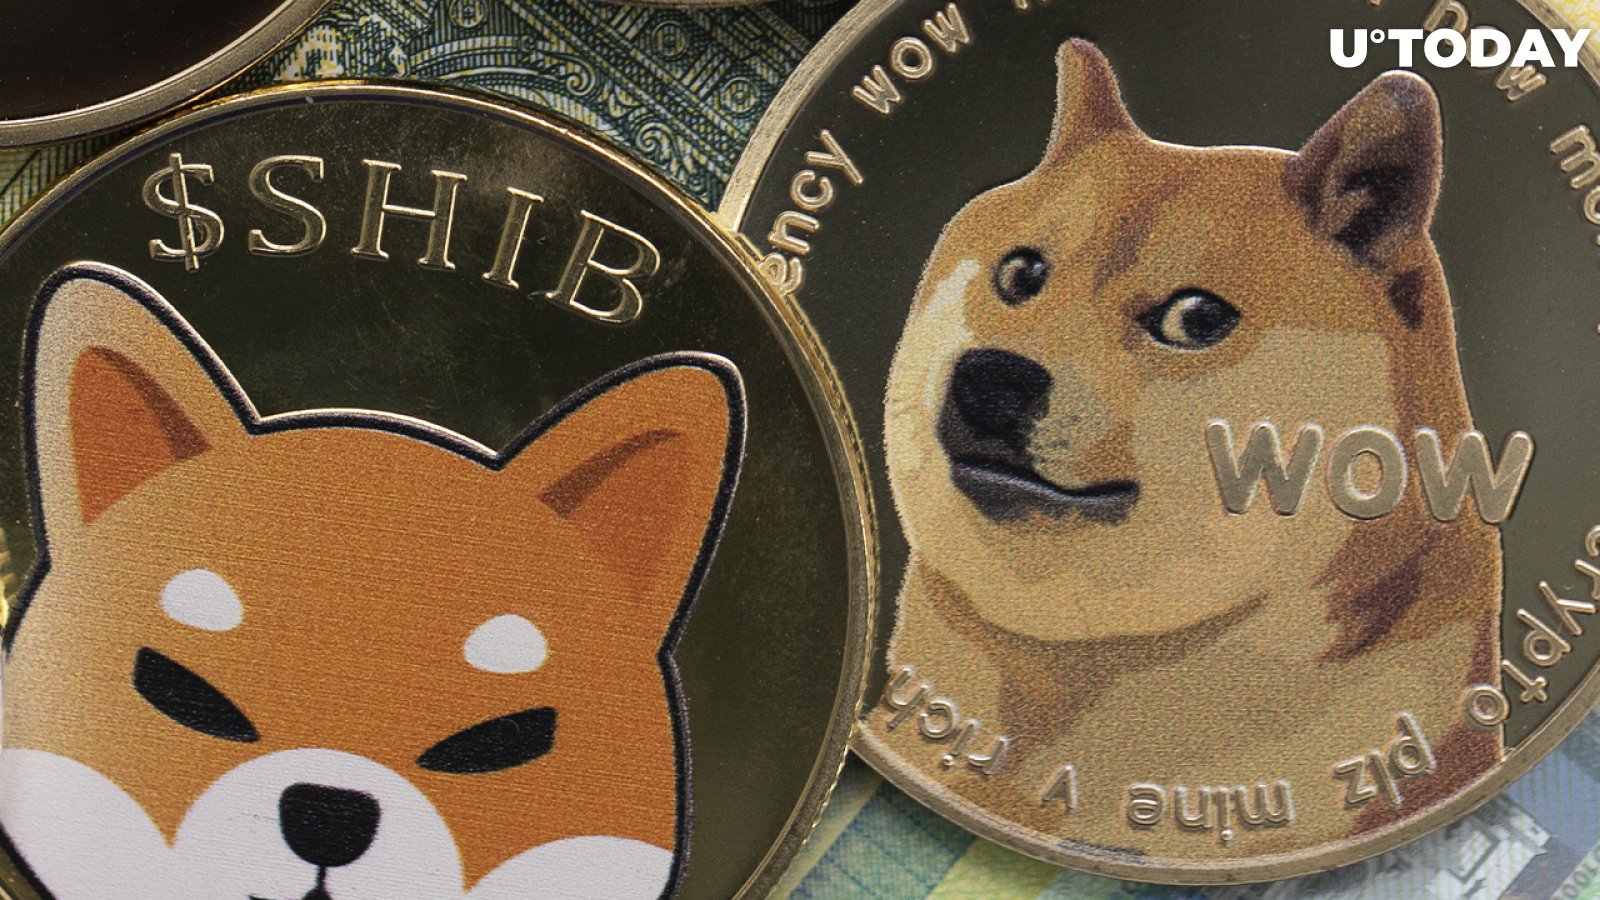 Shiba Inu and Dogecoin Facing Strong Price Increase as Crypto Market Recovers